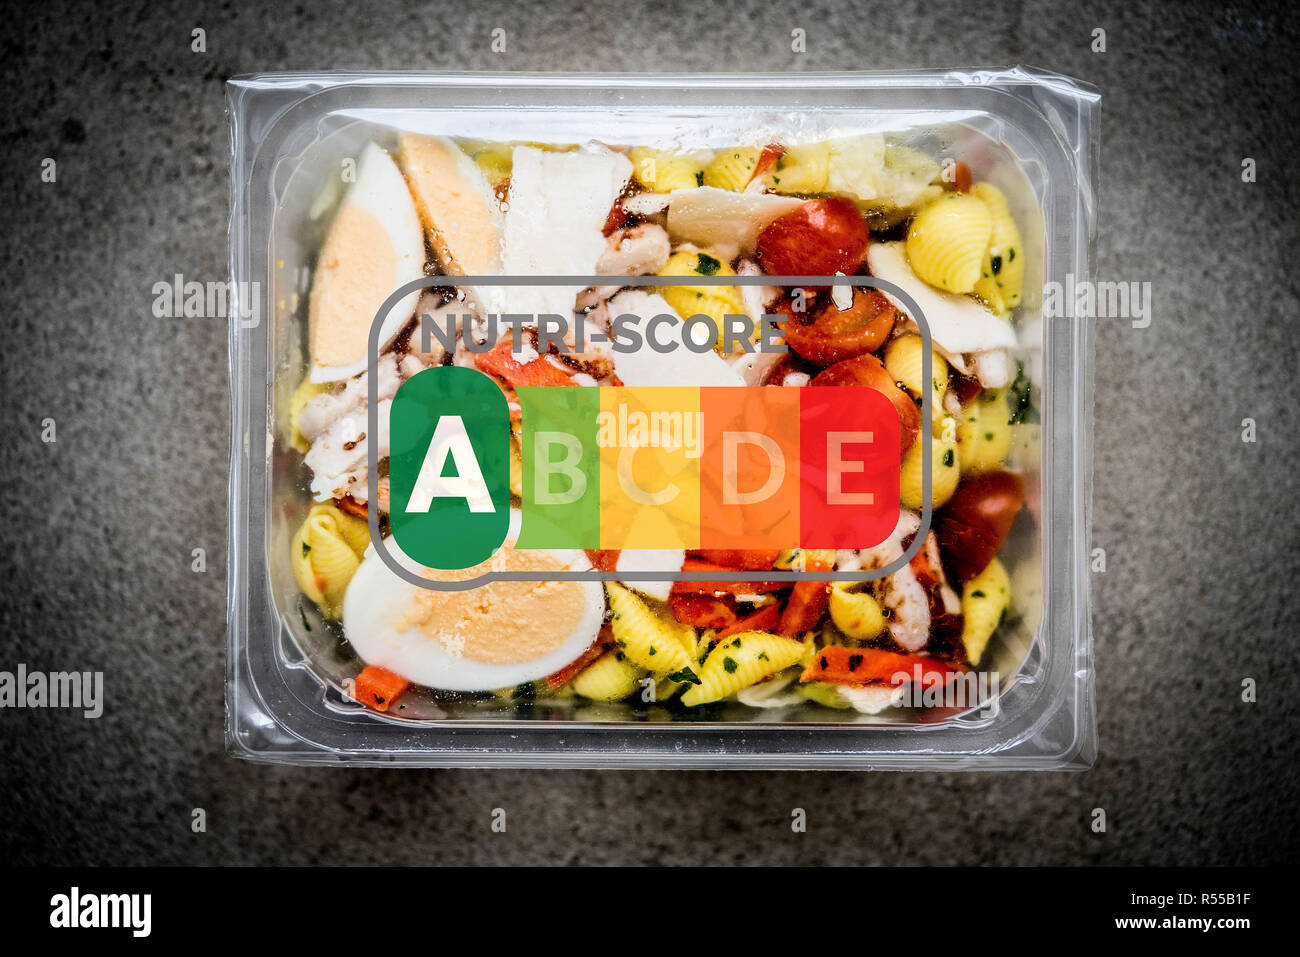 Concept on the nutrition information system in 5 colors NUTRI-SCORE, France. Stock Photo